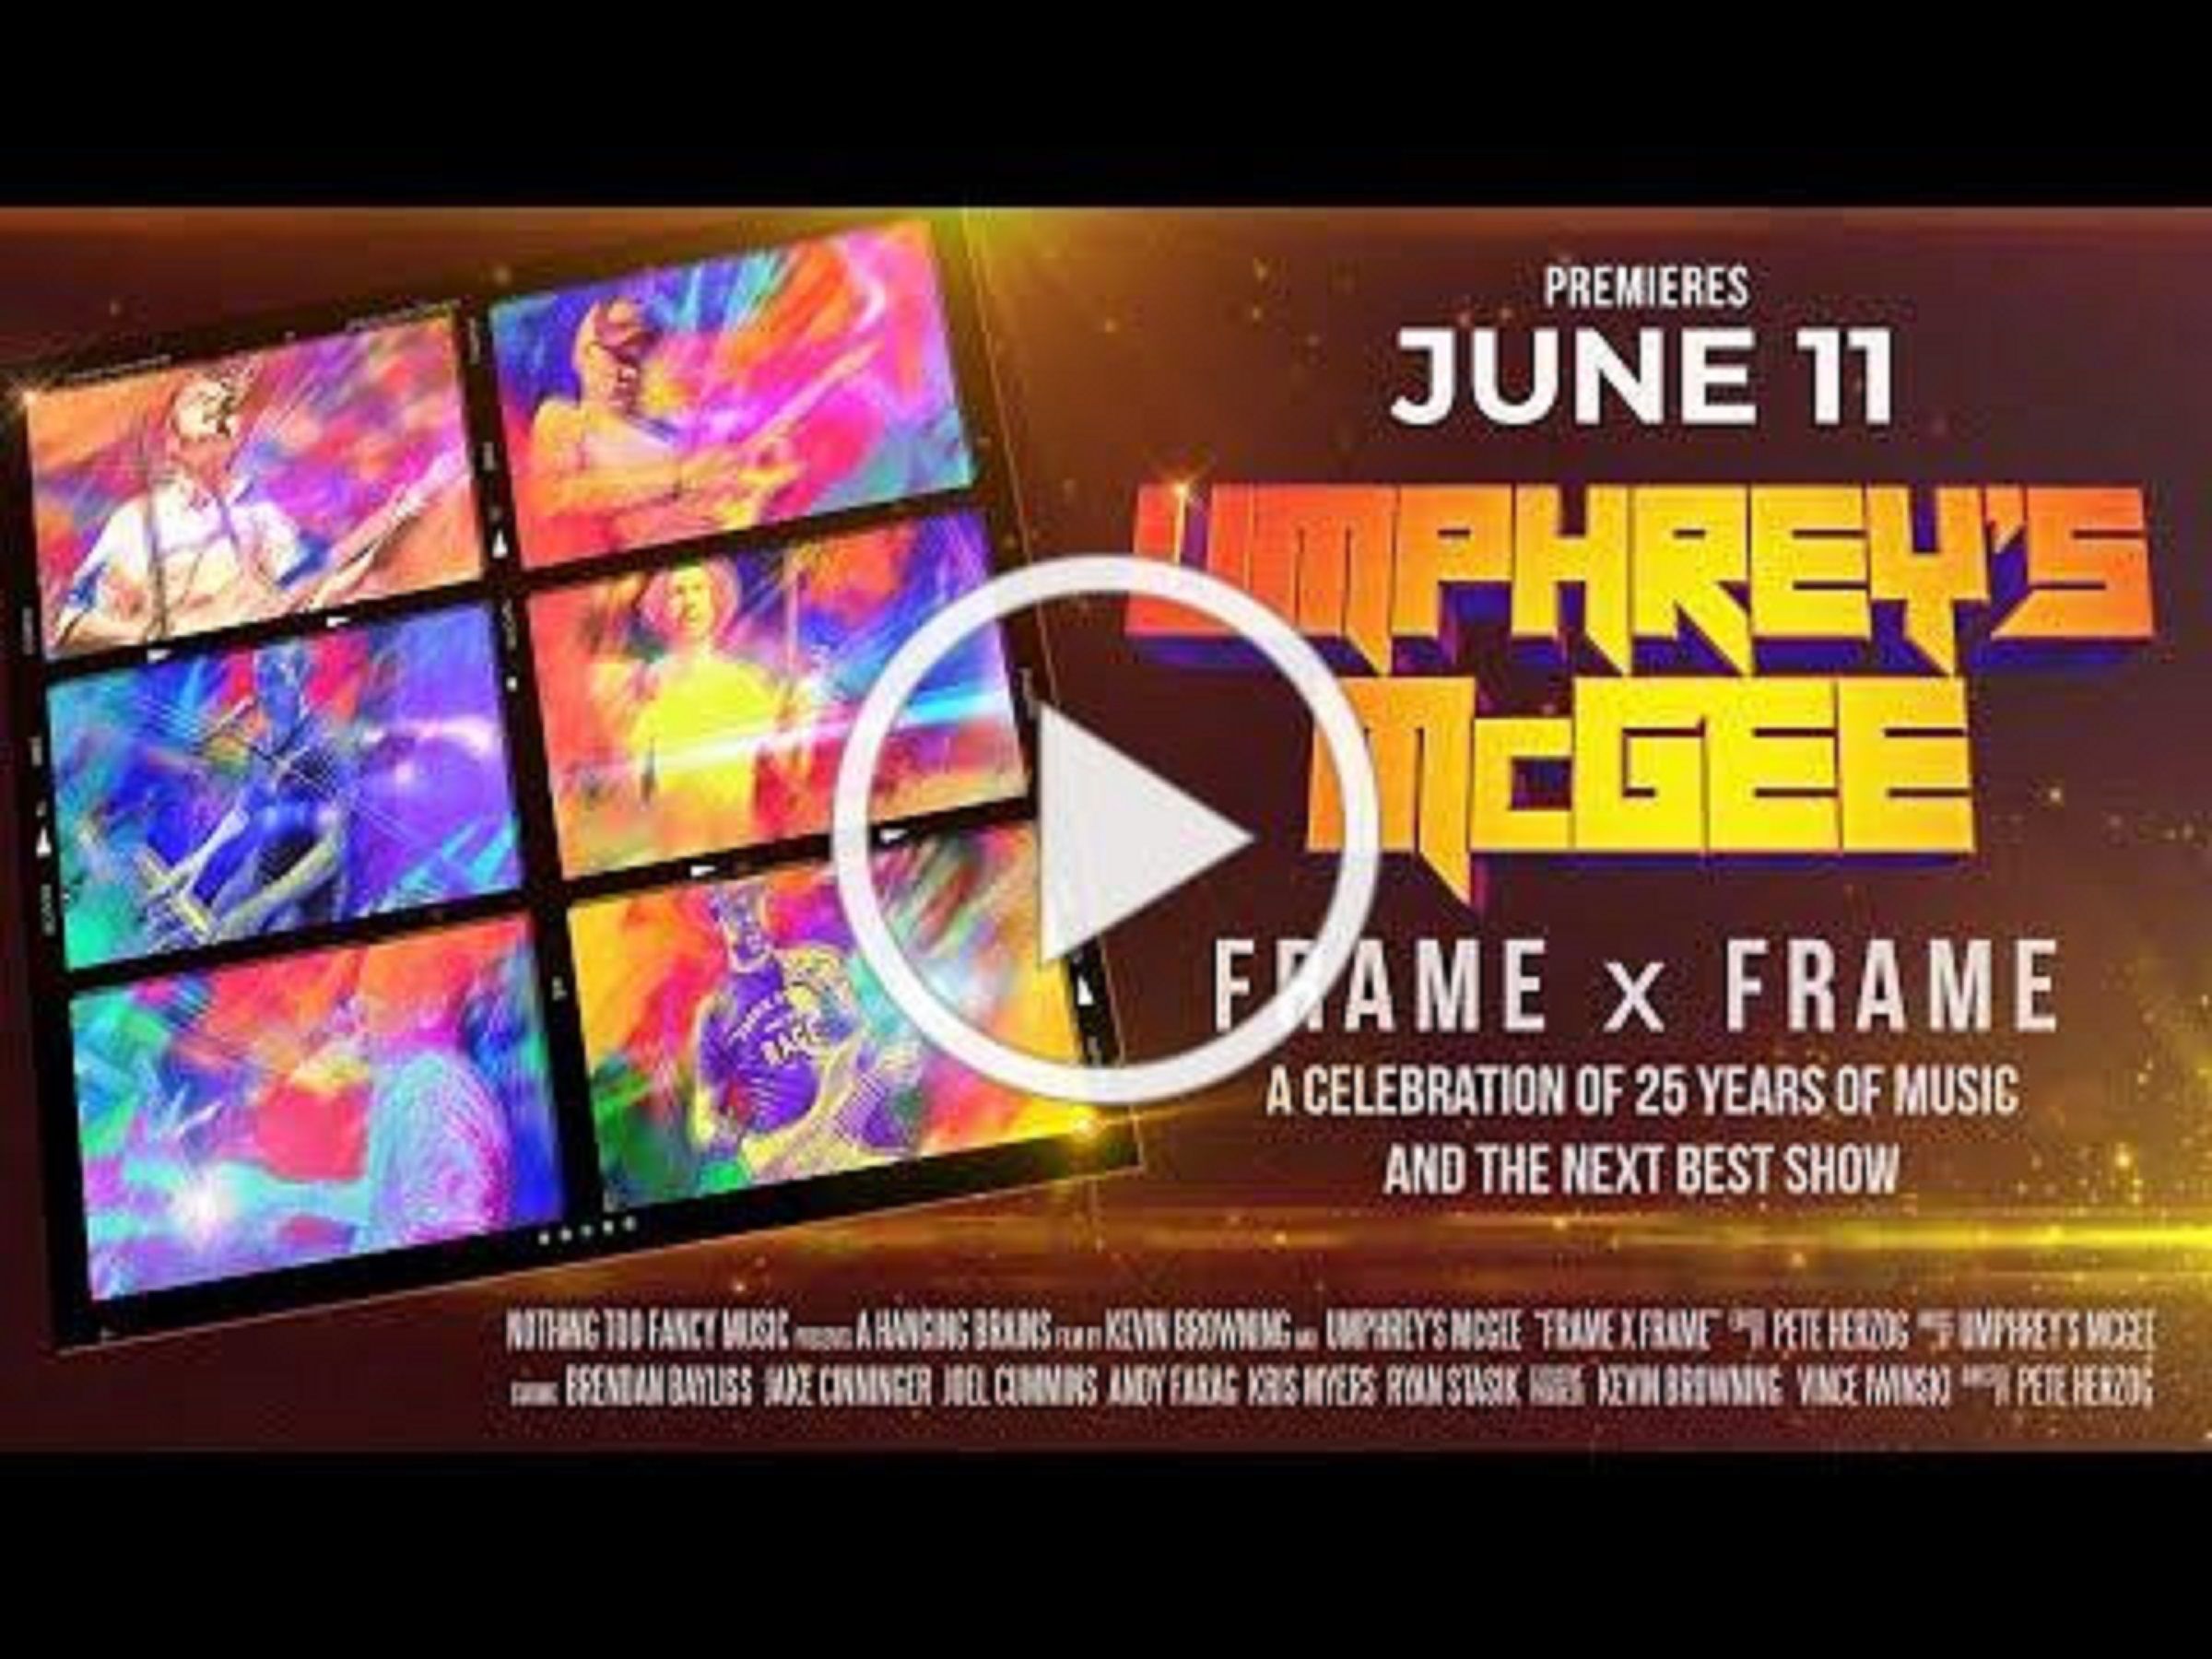 Umphrey’s McGee Celebrate 25 Years Together With New Rockumentary Frame x Frame